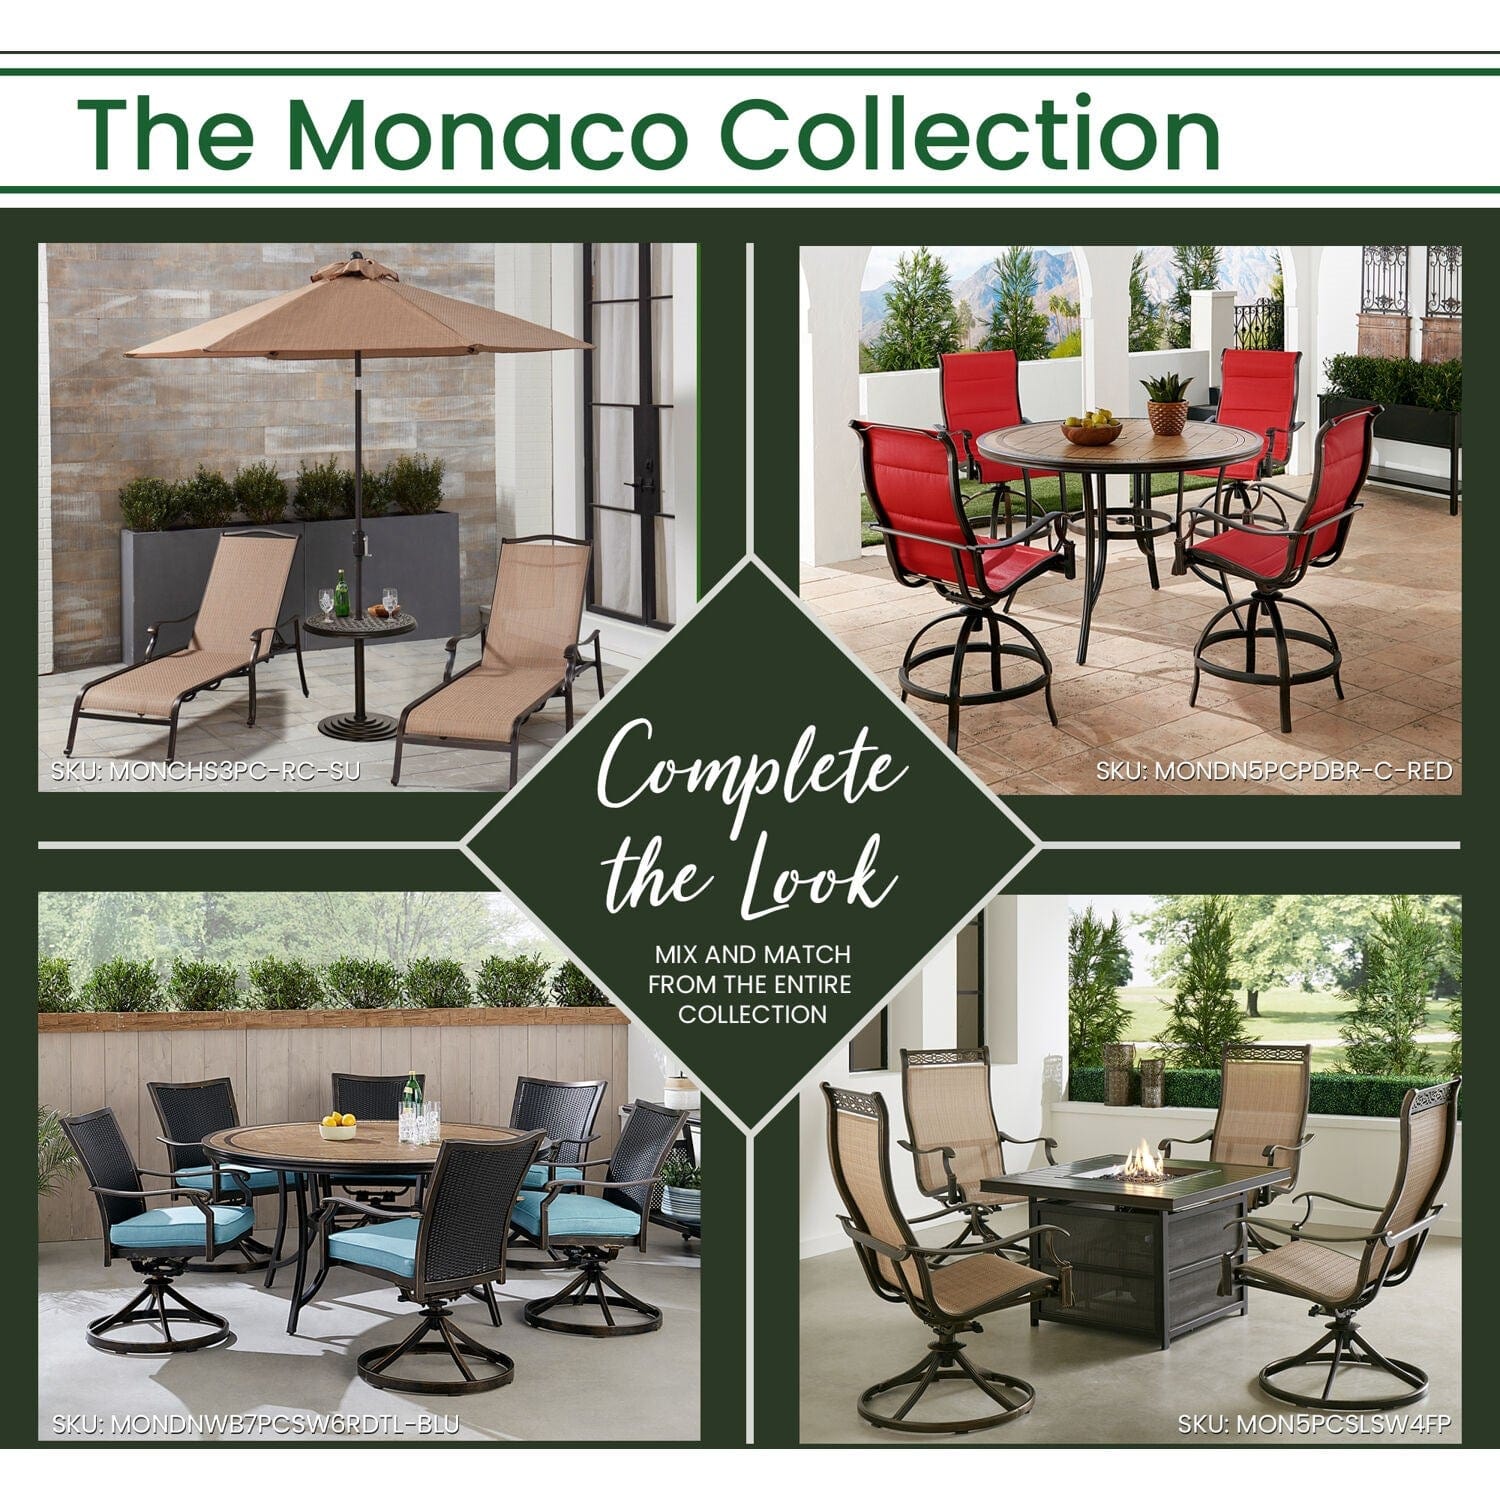 Hanover Outdoor Dining Set Hanover Monaco 7-Piece High-Dining Set in Tan with a 56 In. Tile-top Table and 6 Swivel Chairs - MONDN7PCBR-C